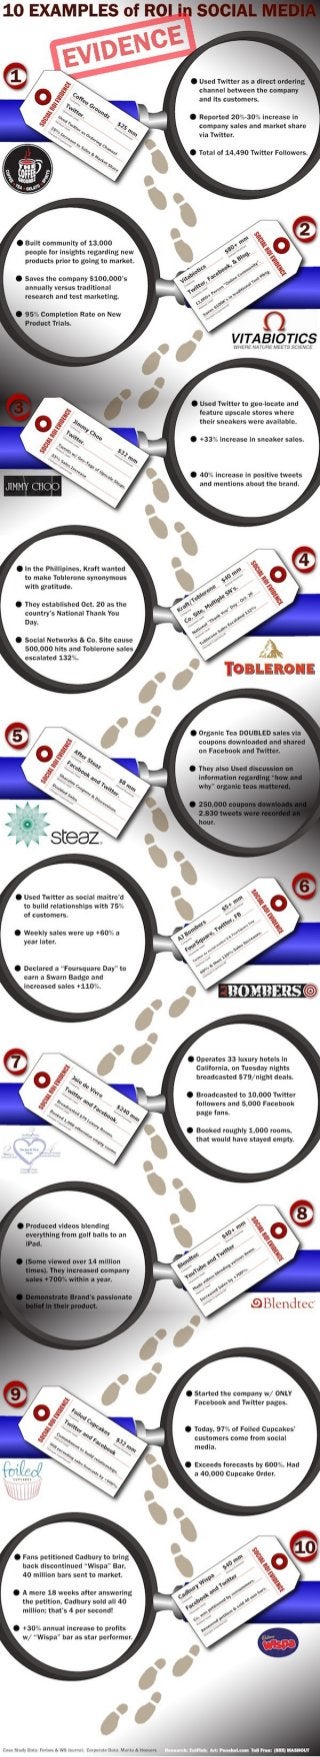 Collaborative IQ with Denise Holt - INFOGRAPHIC 10 Examples of ROI in Social Media